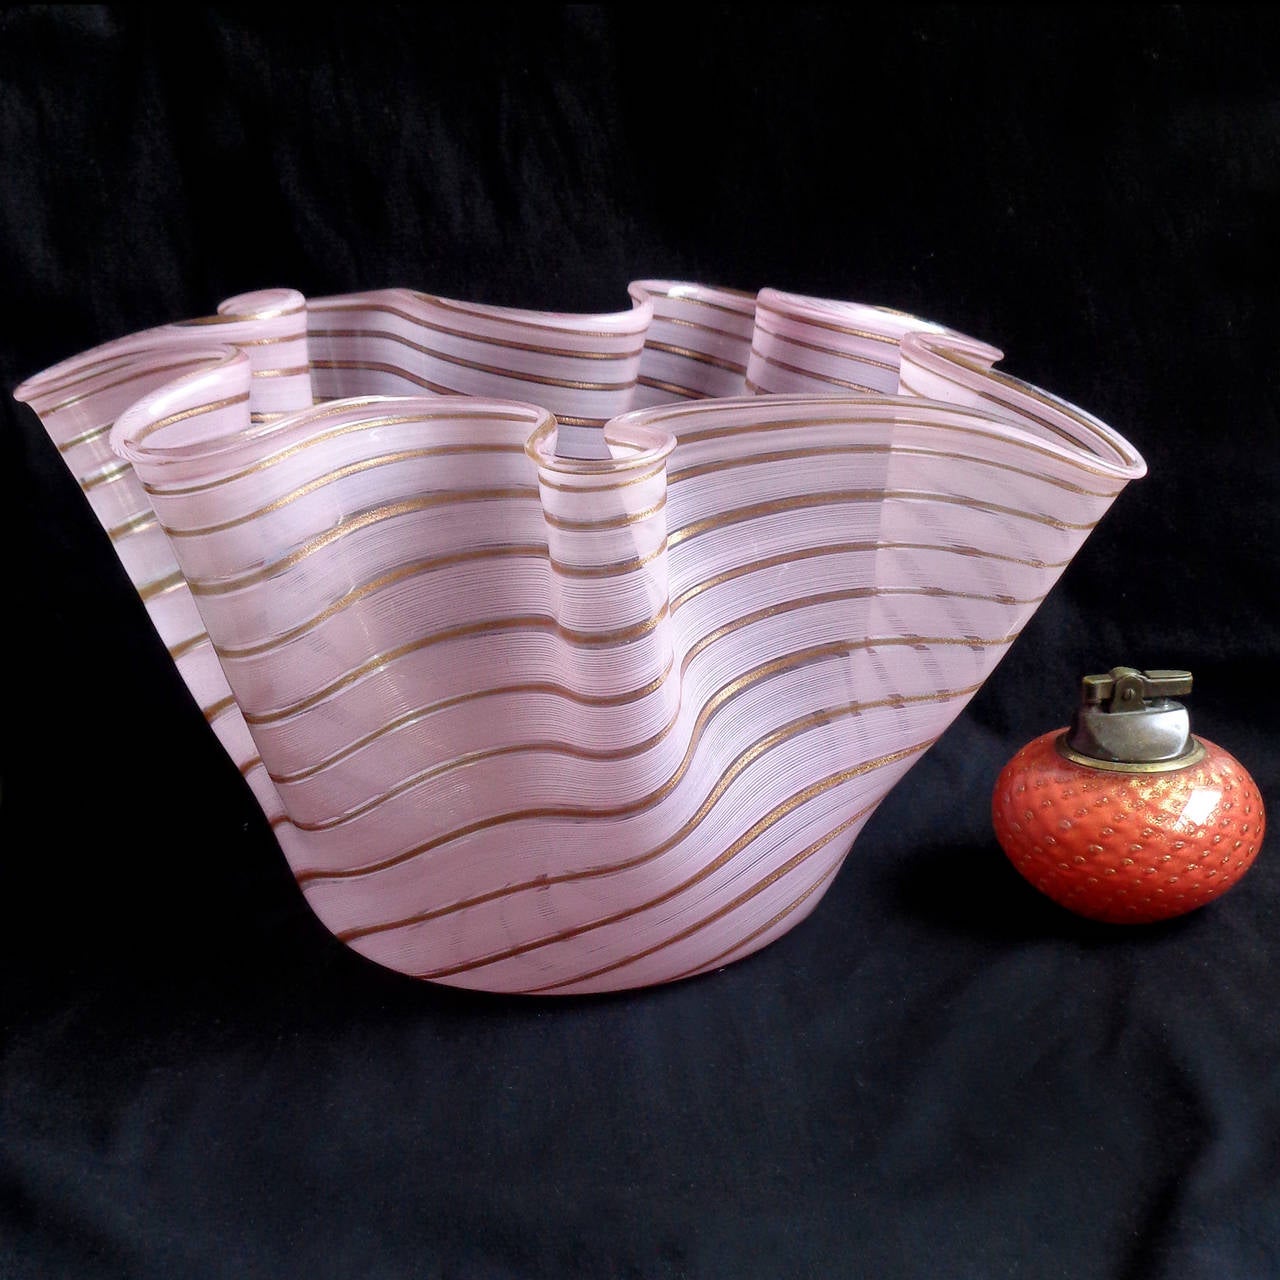 Free shipping worldwide! See details below description.

Amazing large Murano handblown pink and aventurine flecks filigrana ribbons art glass fazzoletto vase. Documented to designer Dino Martens for Aureliano Toso. Great centerpiece for your